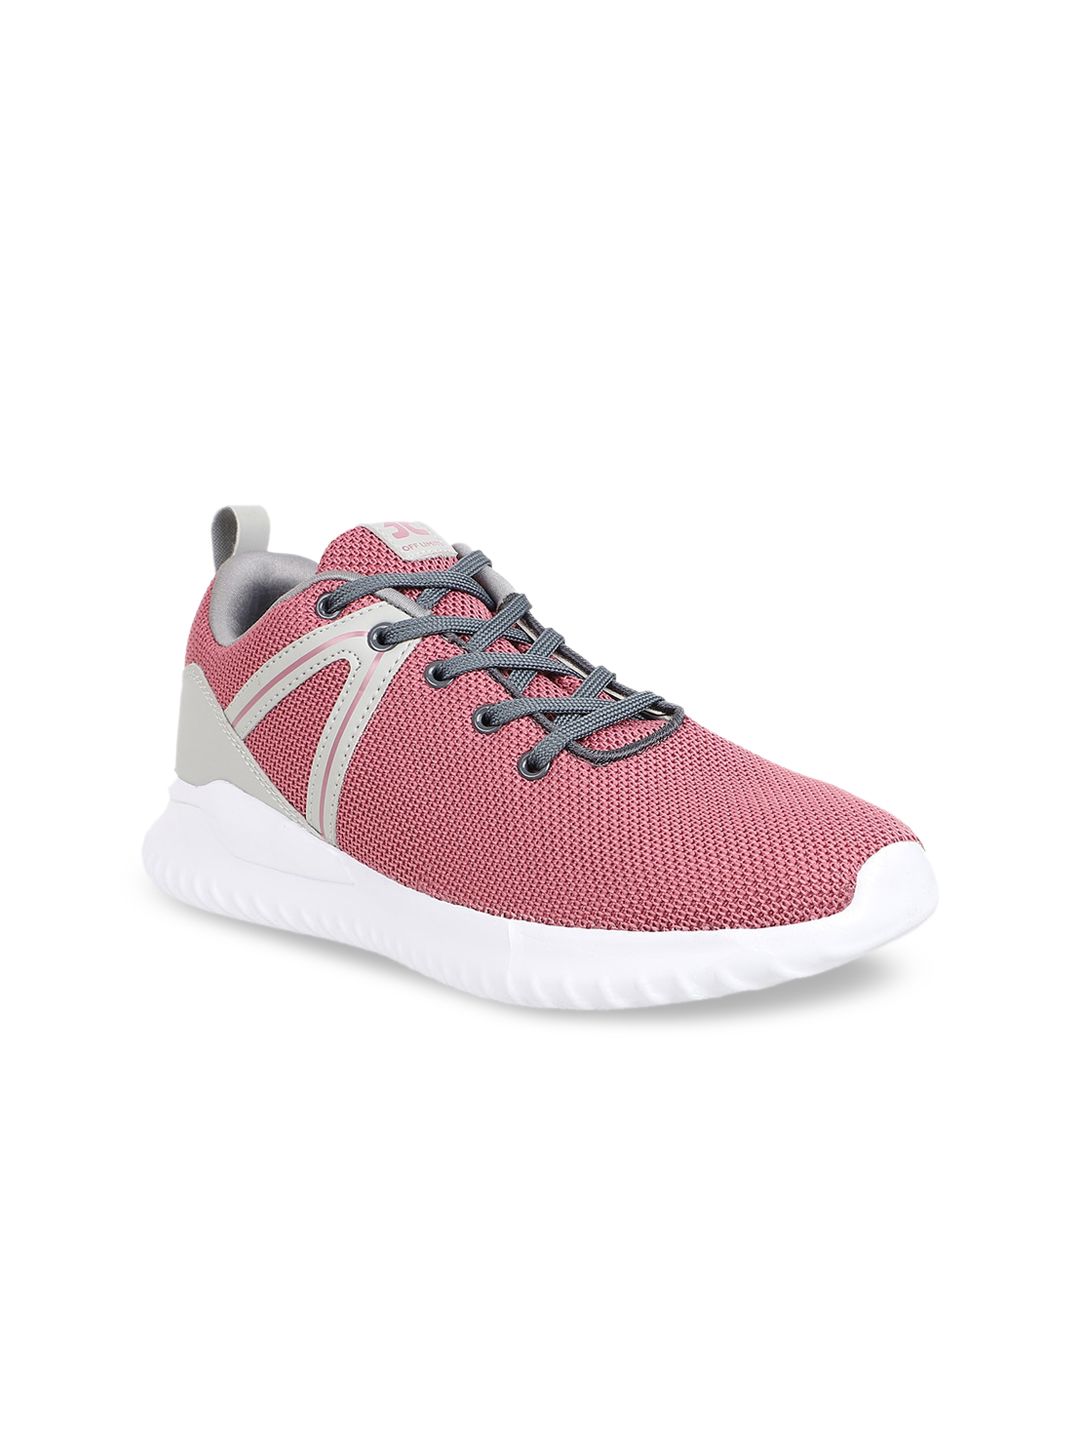 OFF LIMITS Women Pink Mesh Mid-Top Running Shoes Price in India